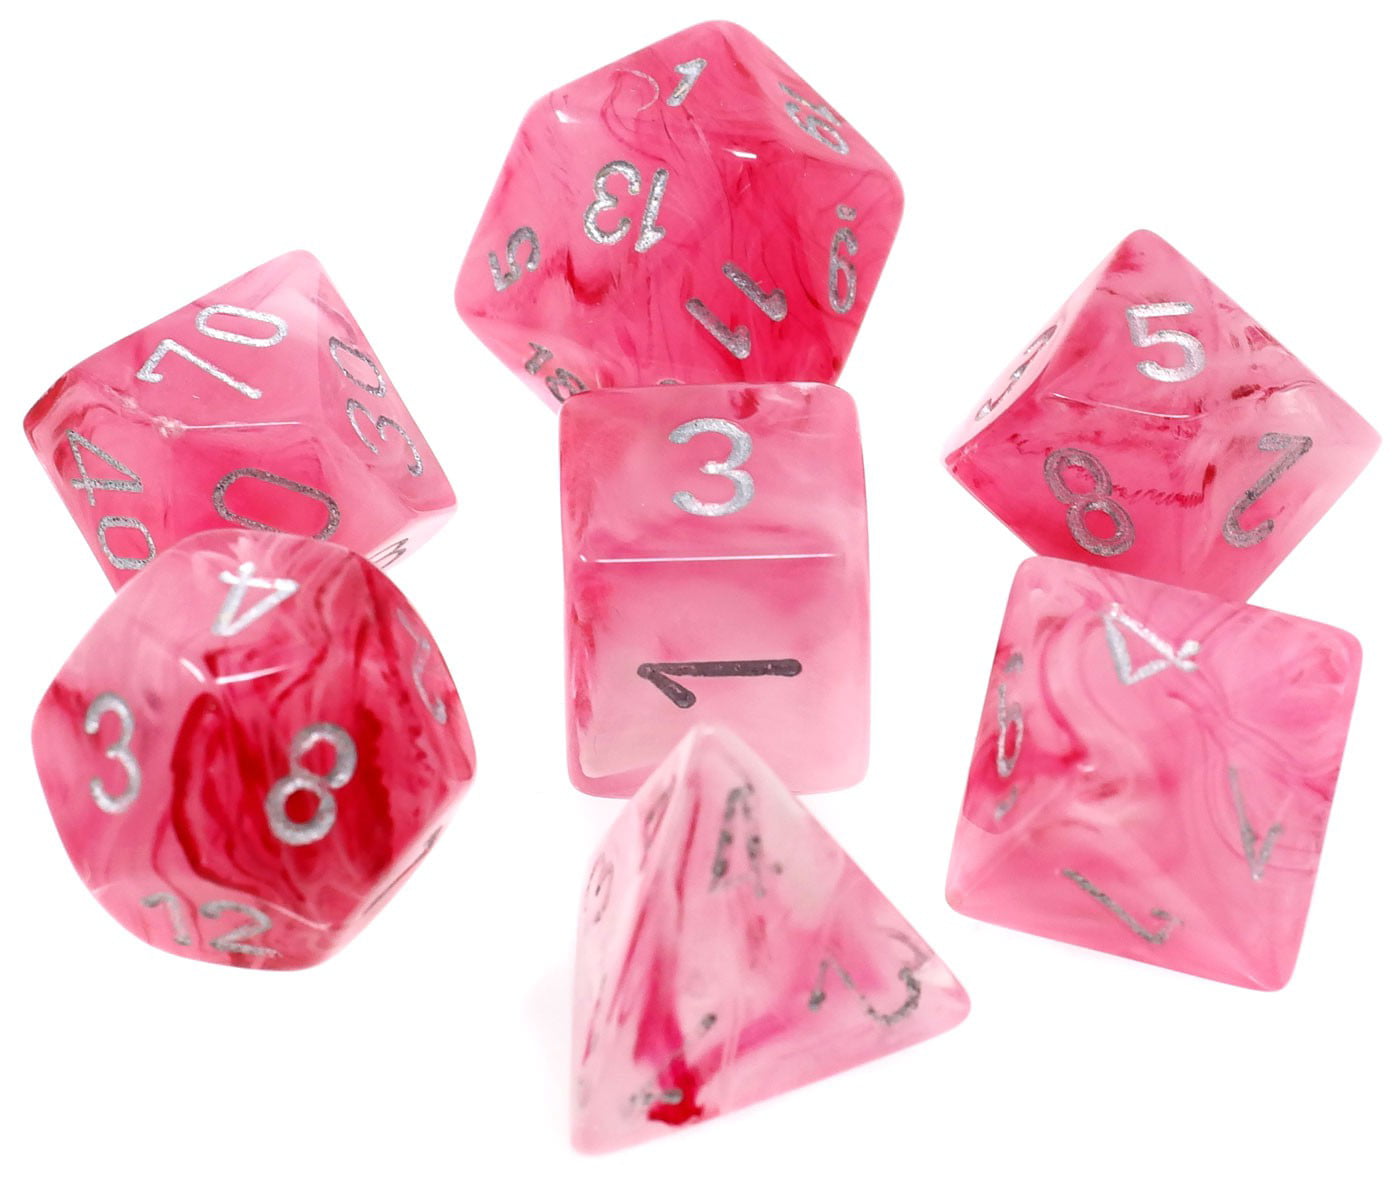 Silver Polyhedral 7-Die Set Chessex Dice Dadi Chessex Borealis Pink w 